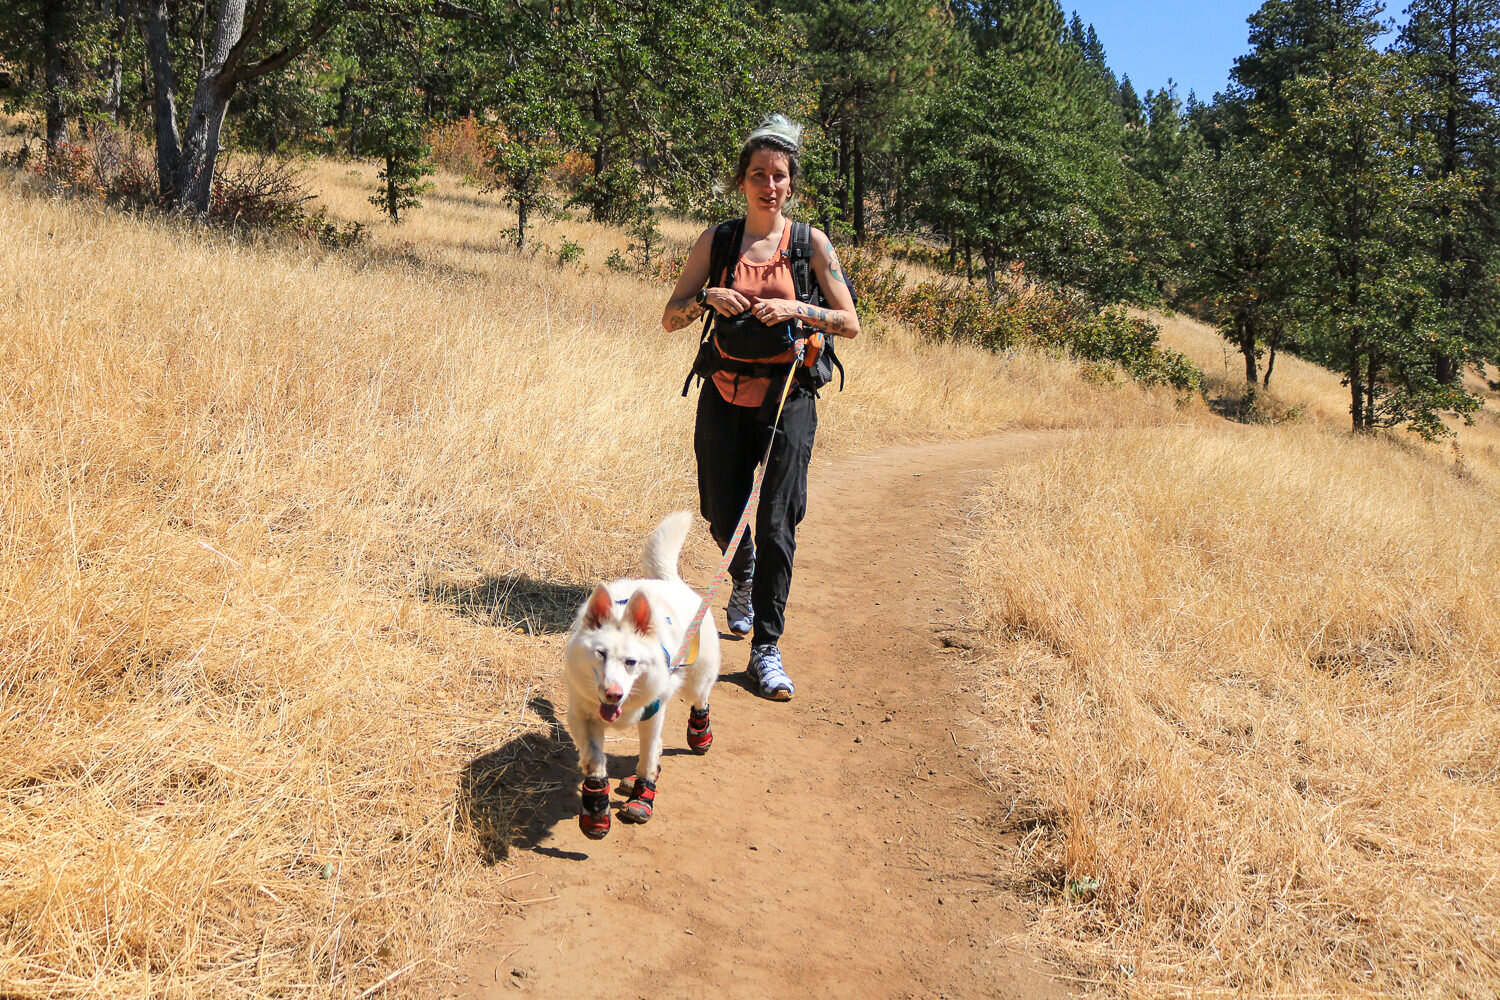 Be sure to check out our Tips for Hiking with a Dog post to learn how to keep hikes safe and enjoyable for both of you